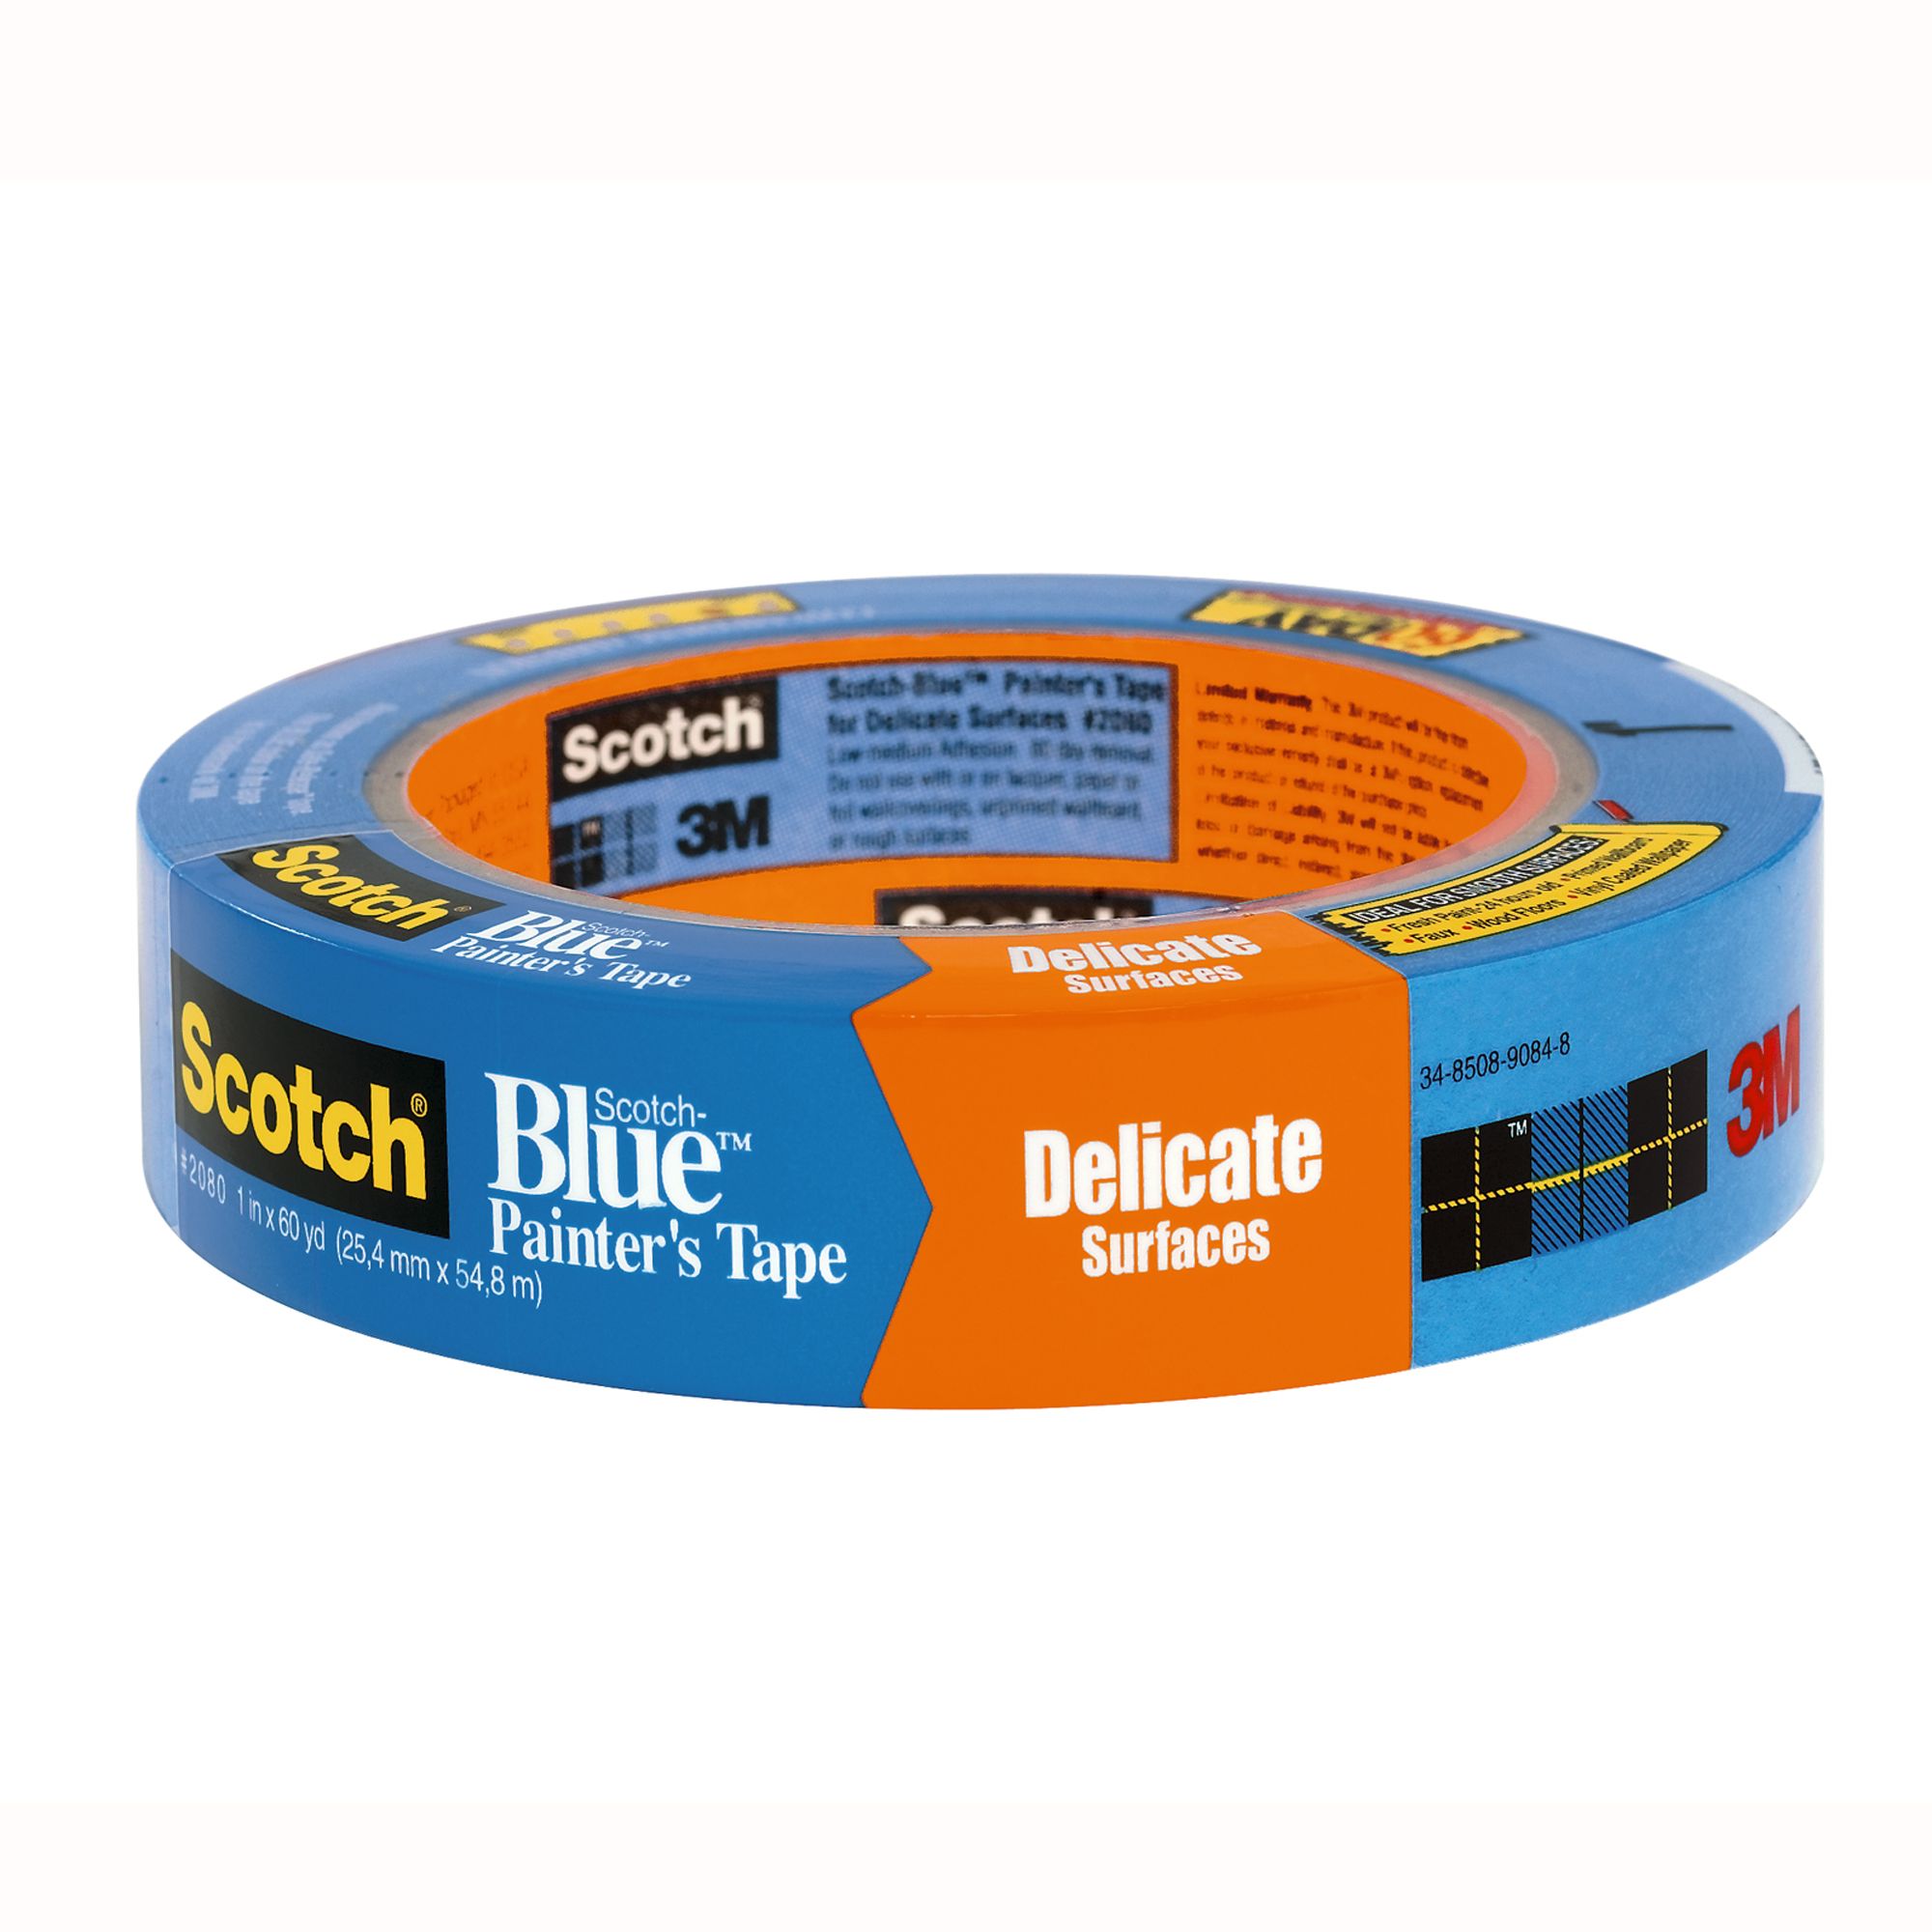 Scotch Masking Tape for Delicate Surfaces - 1 in. x 45 yd.